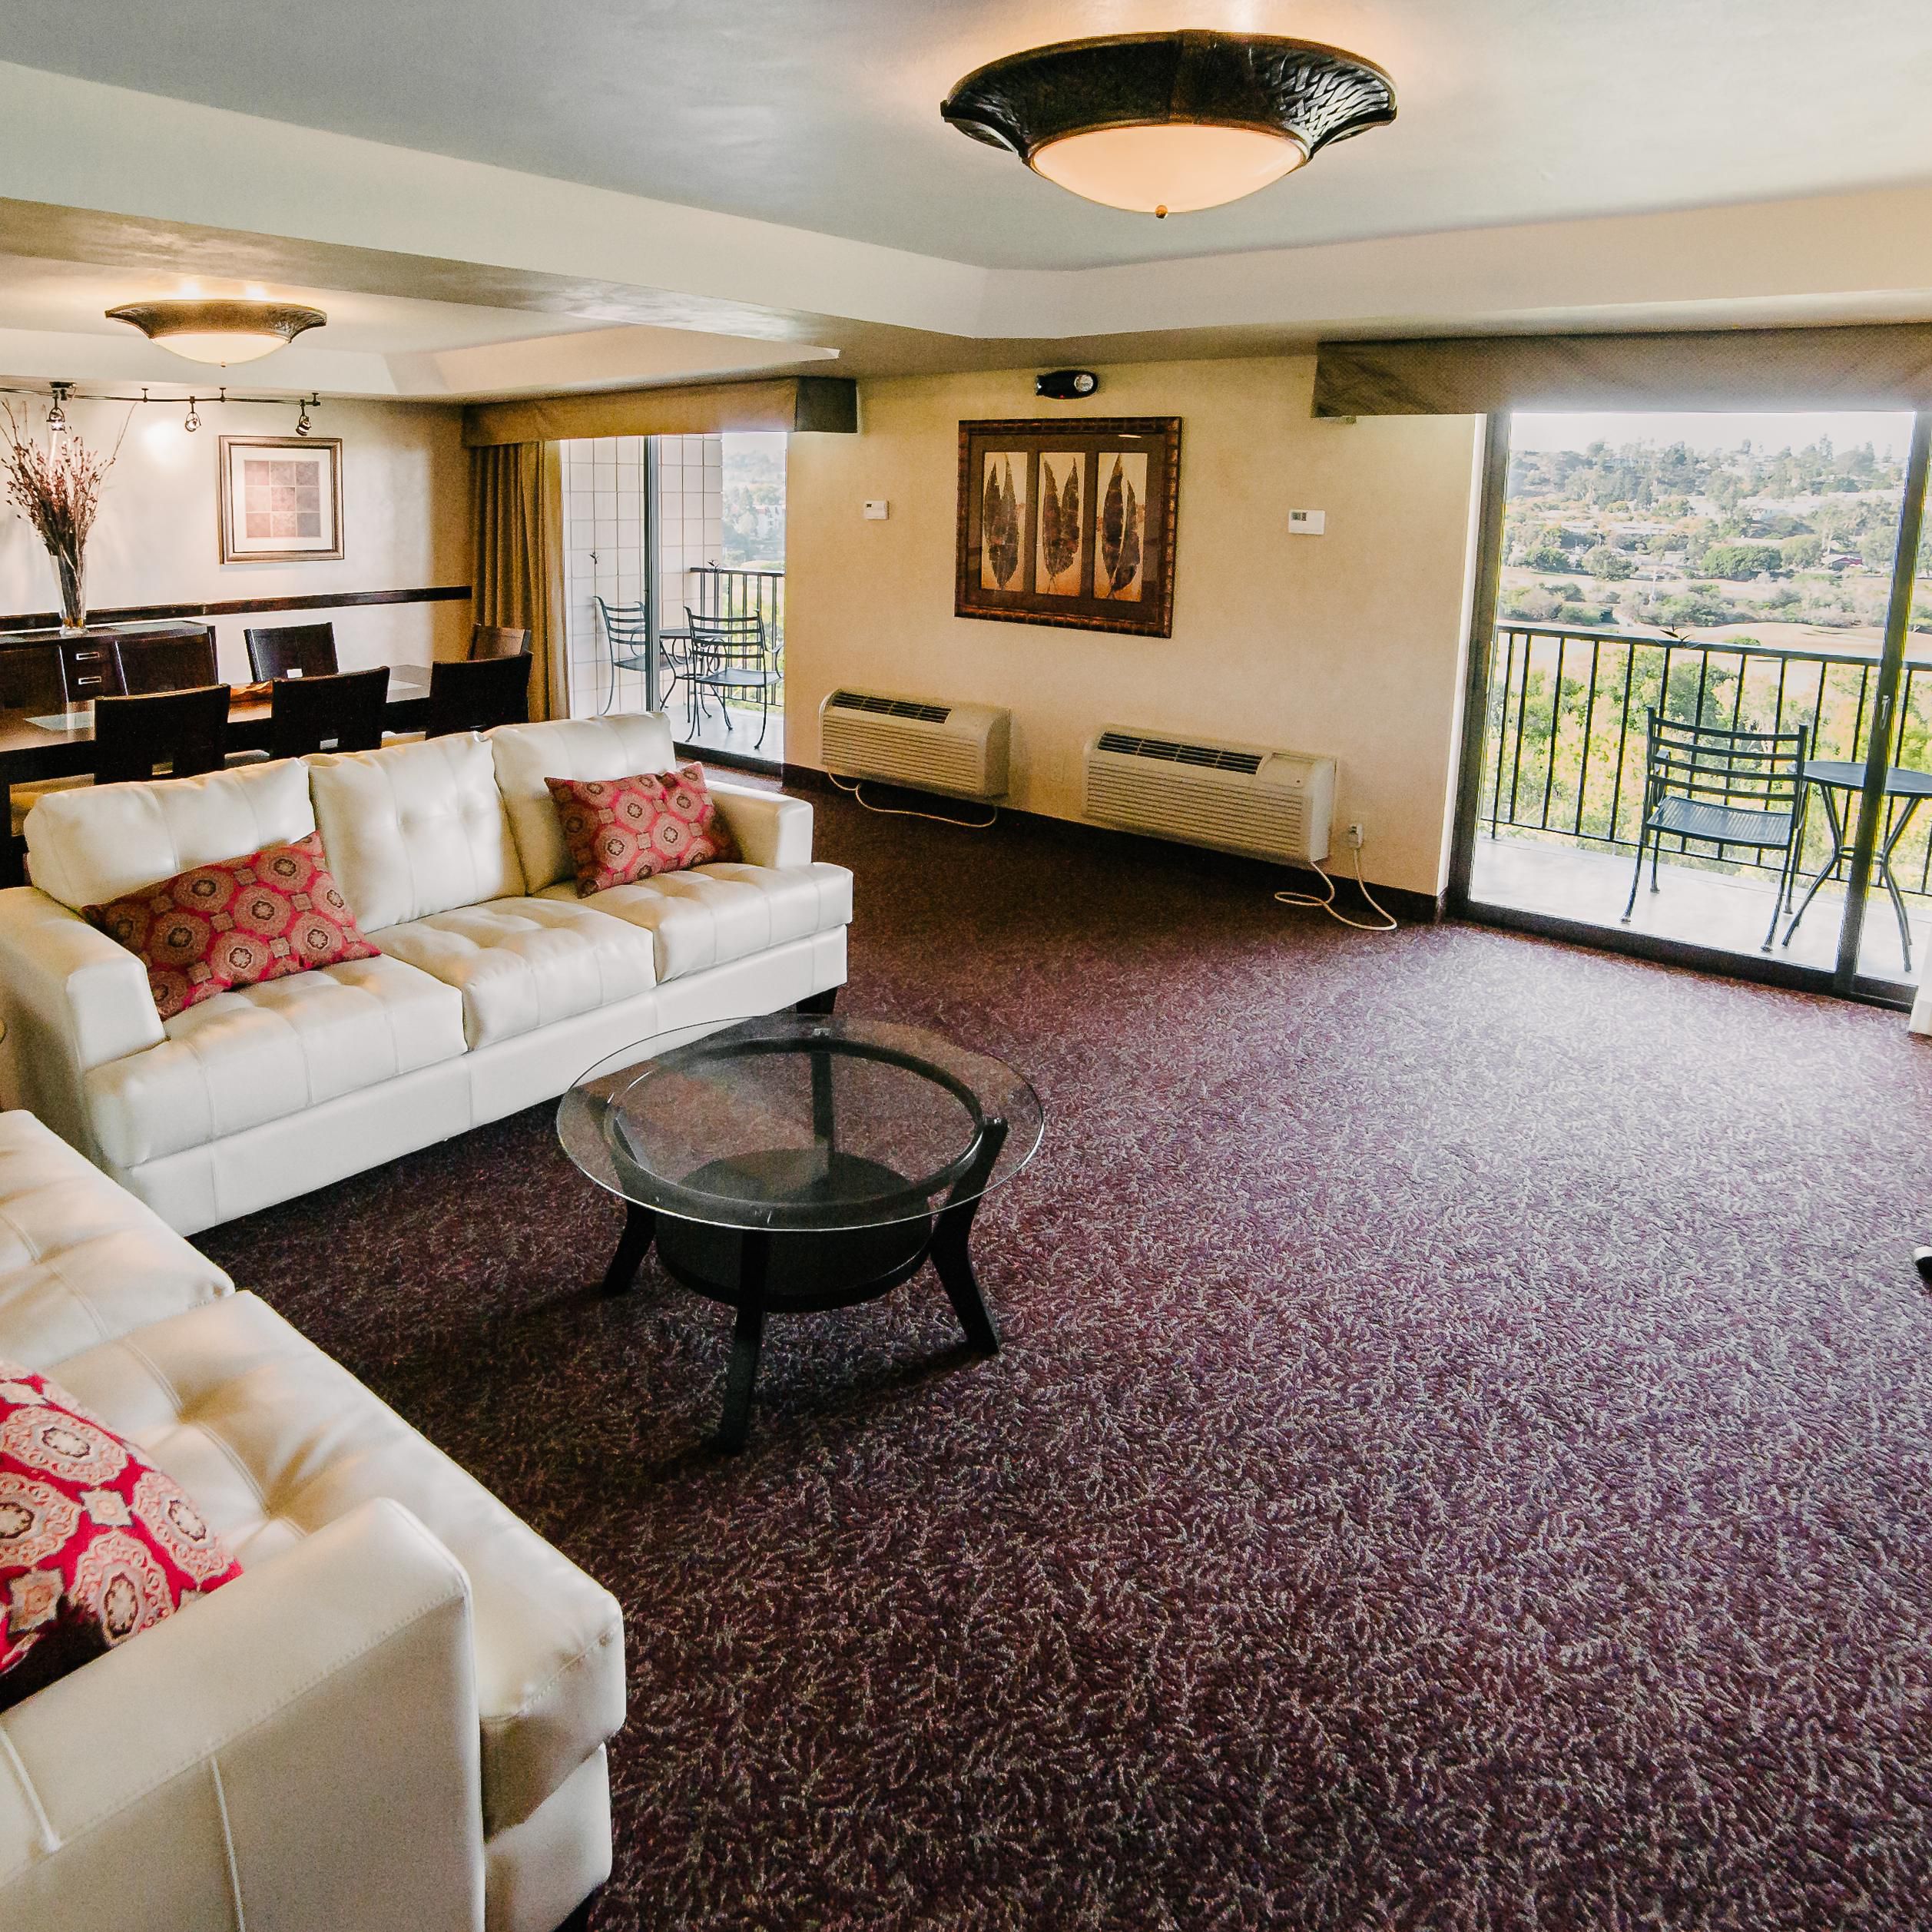 Make yourself at home in our spacious suites